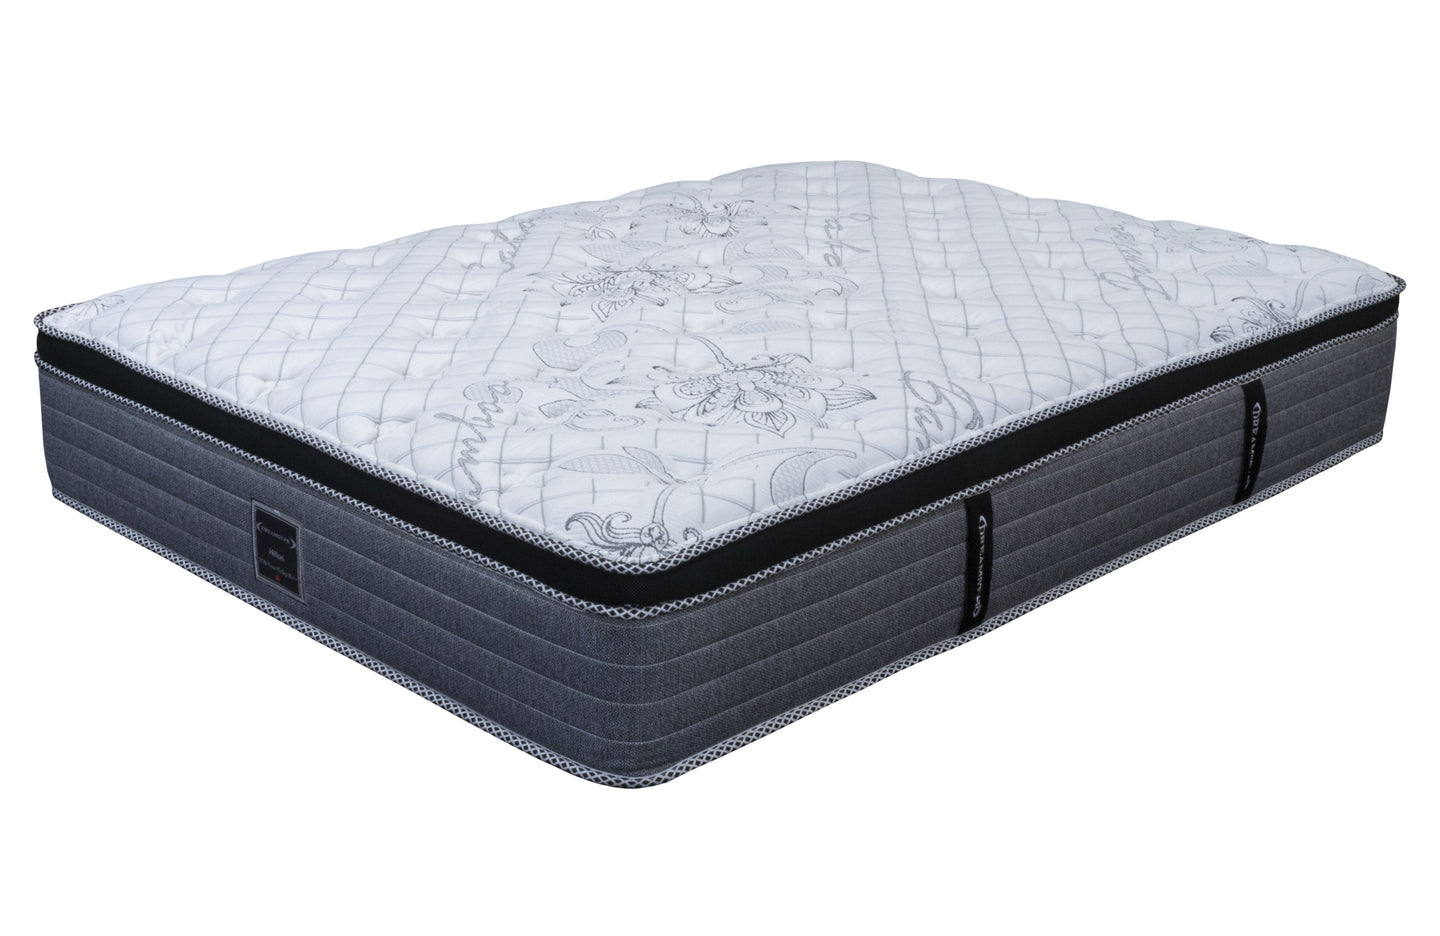 The Hilton Memory Foam Pocket Coil Set Retails For Over 1699.99 On Sale Now